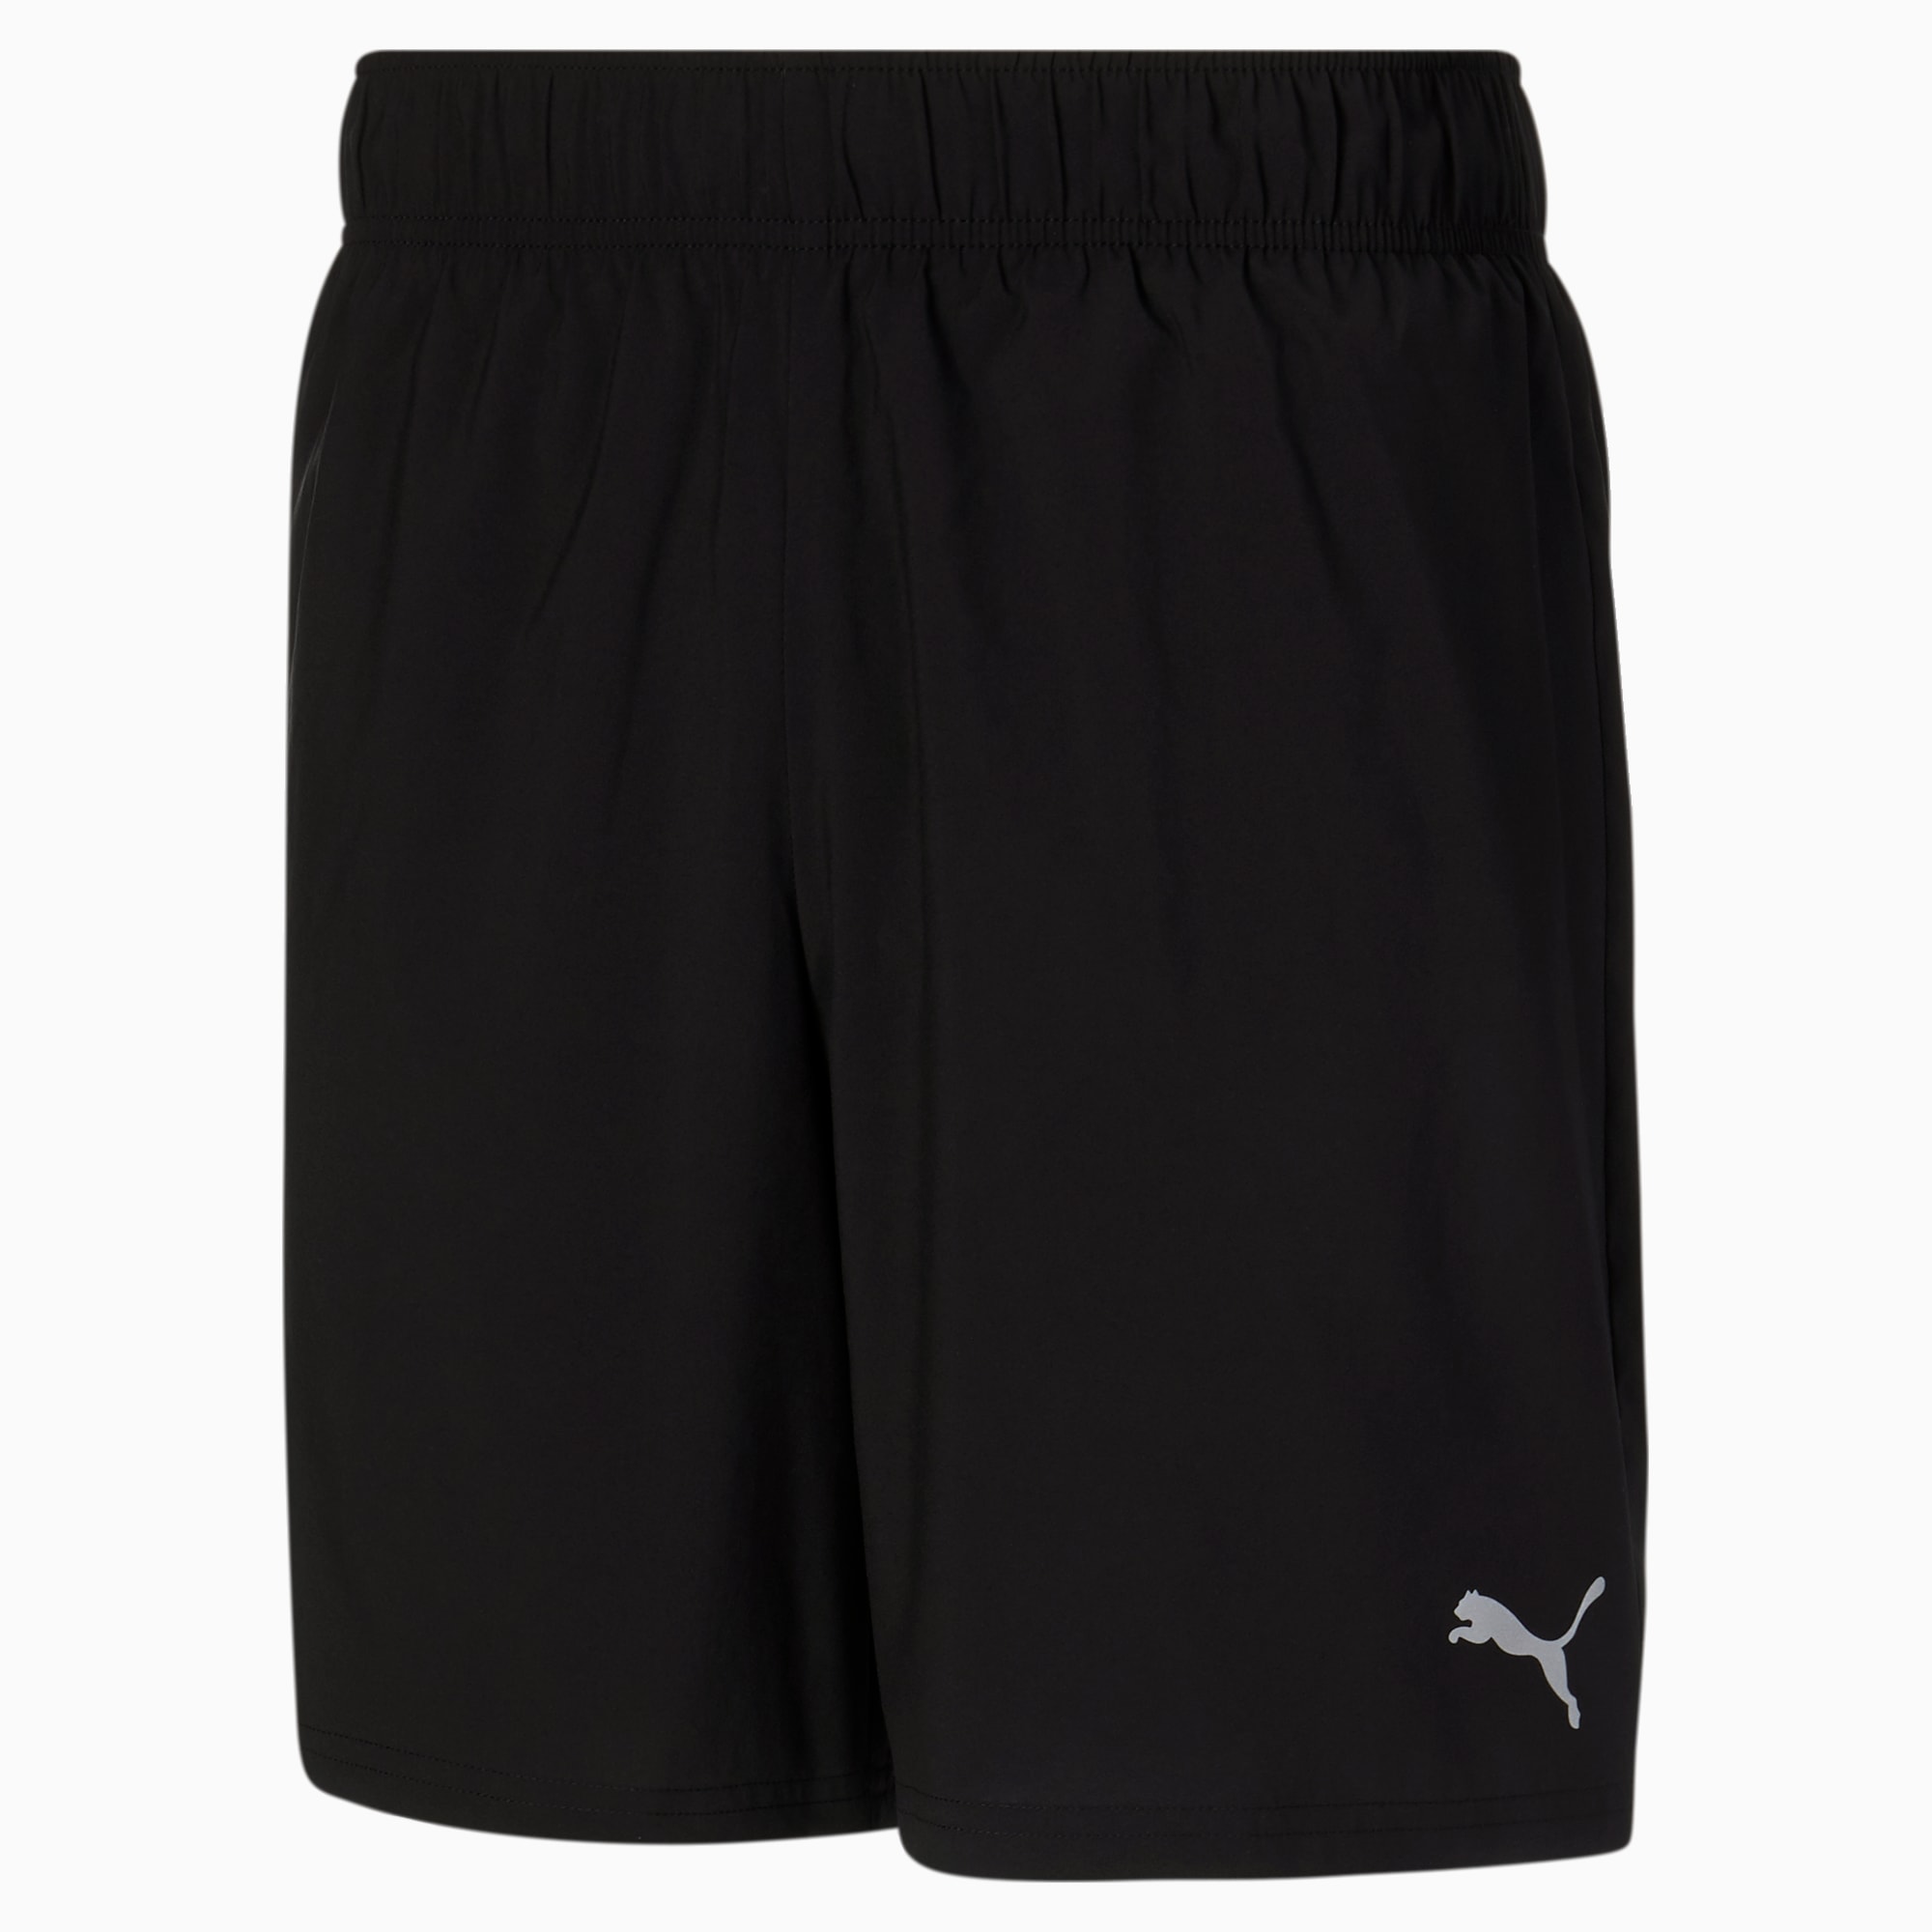 PUMA Favourite 2-in-1 Men's Running Shorts, Black, Size L, Clothing